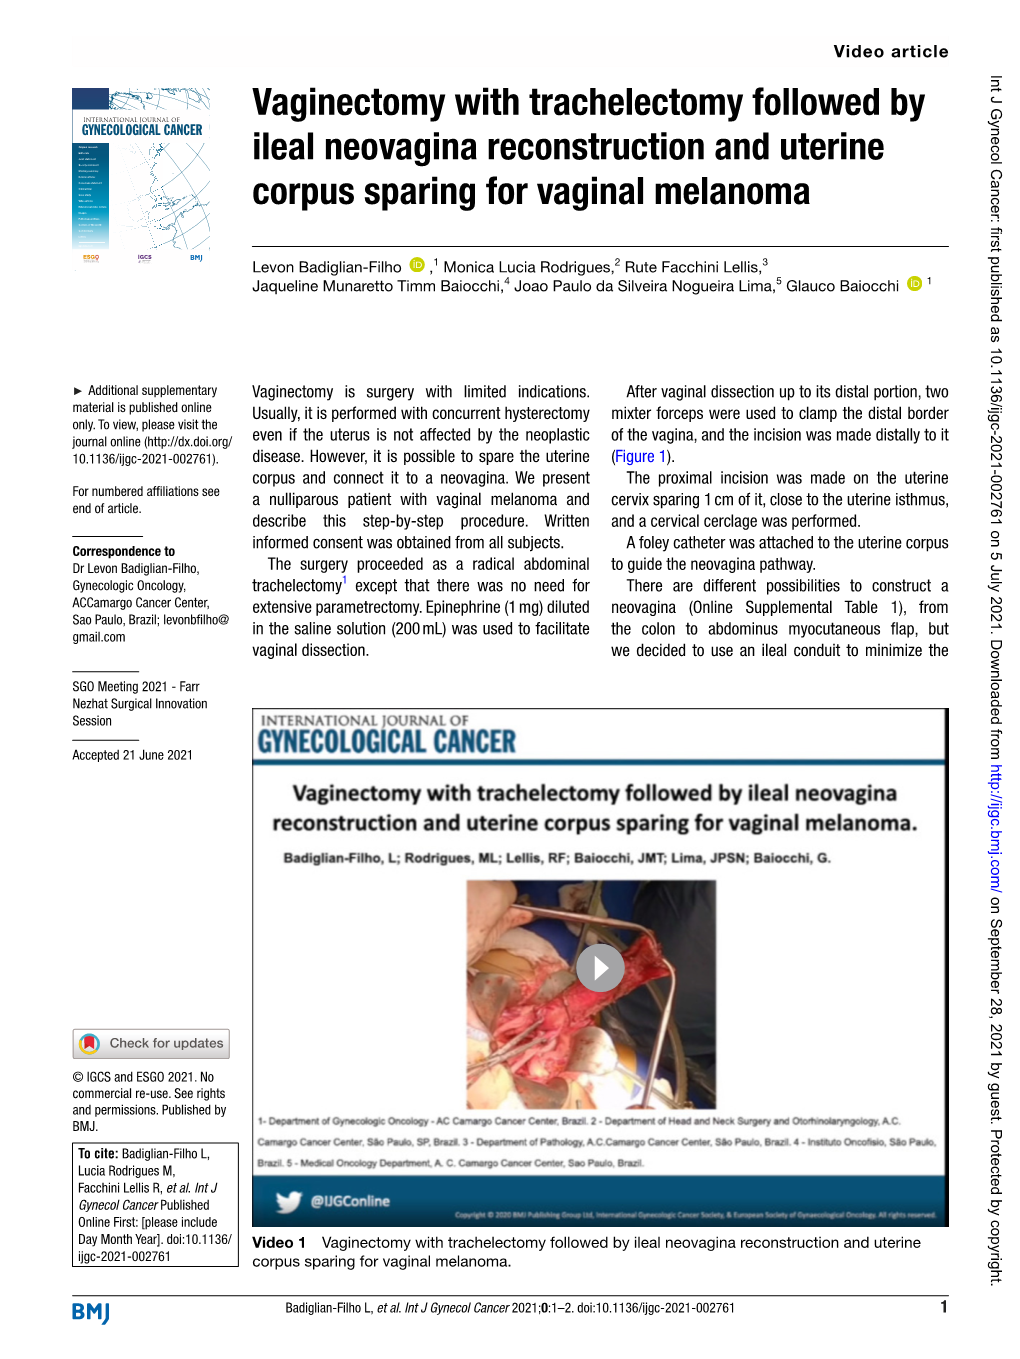 Vaginectomy with Trachelectomy Followed by Ileal Neovagina Reconstruction and Uterine Ijgc-2021-002761 Corpus Sparing for Vaginal Melanoma